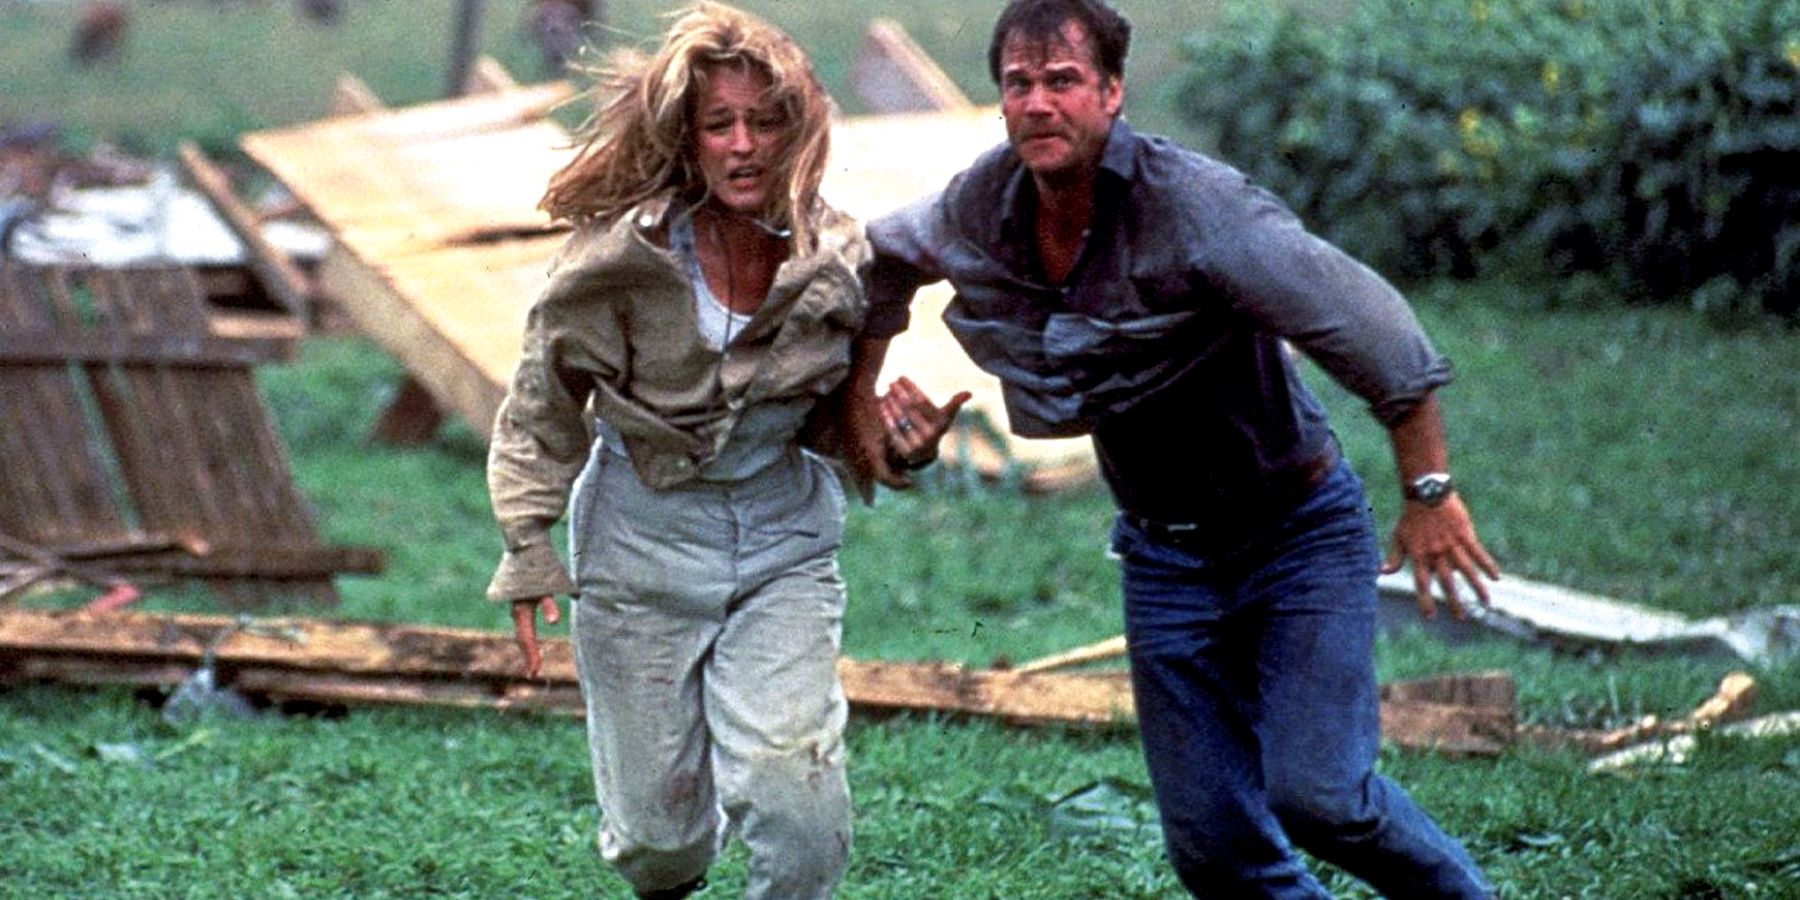 Twister 2’s Original Plan Made The Bold Decision Most Legacy Sequels Avoid